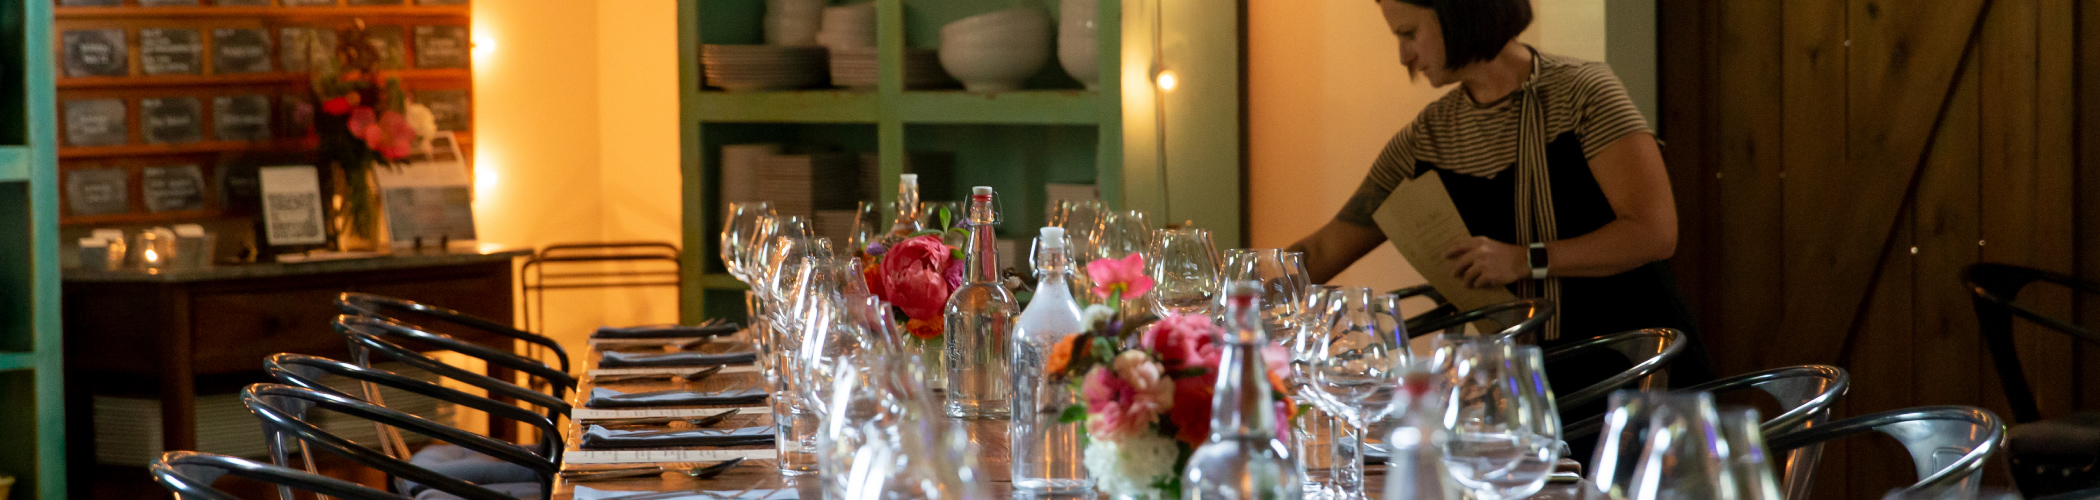 A team member prepares a dinner table for meeting guests at The Kitchen at Middleground Farms